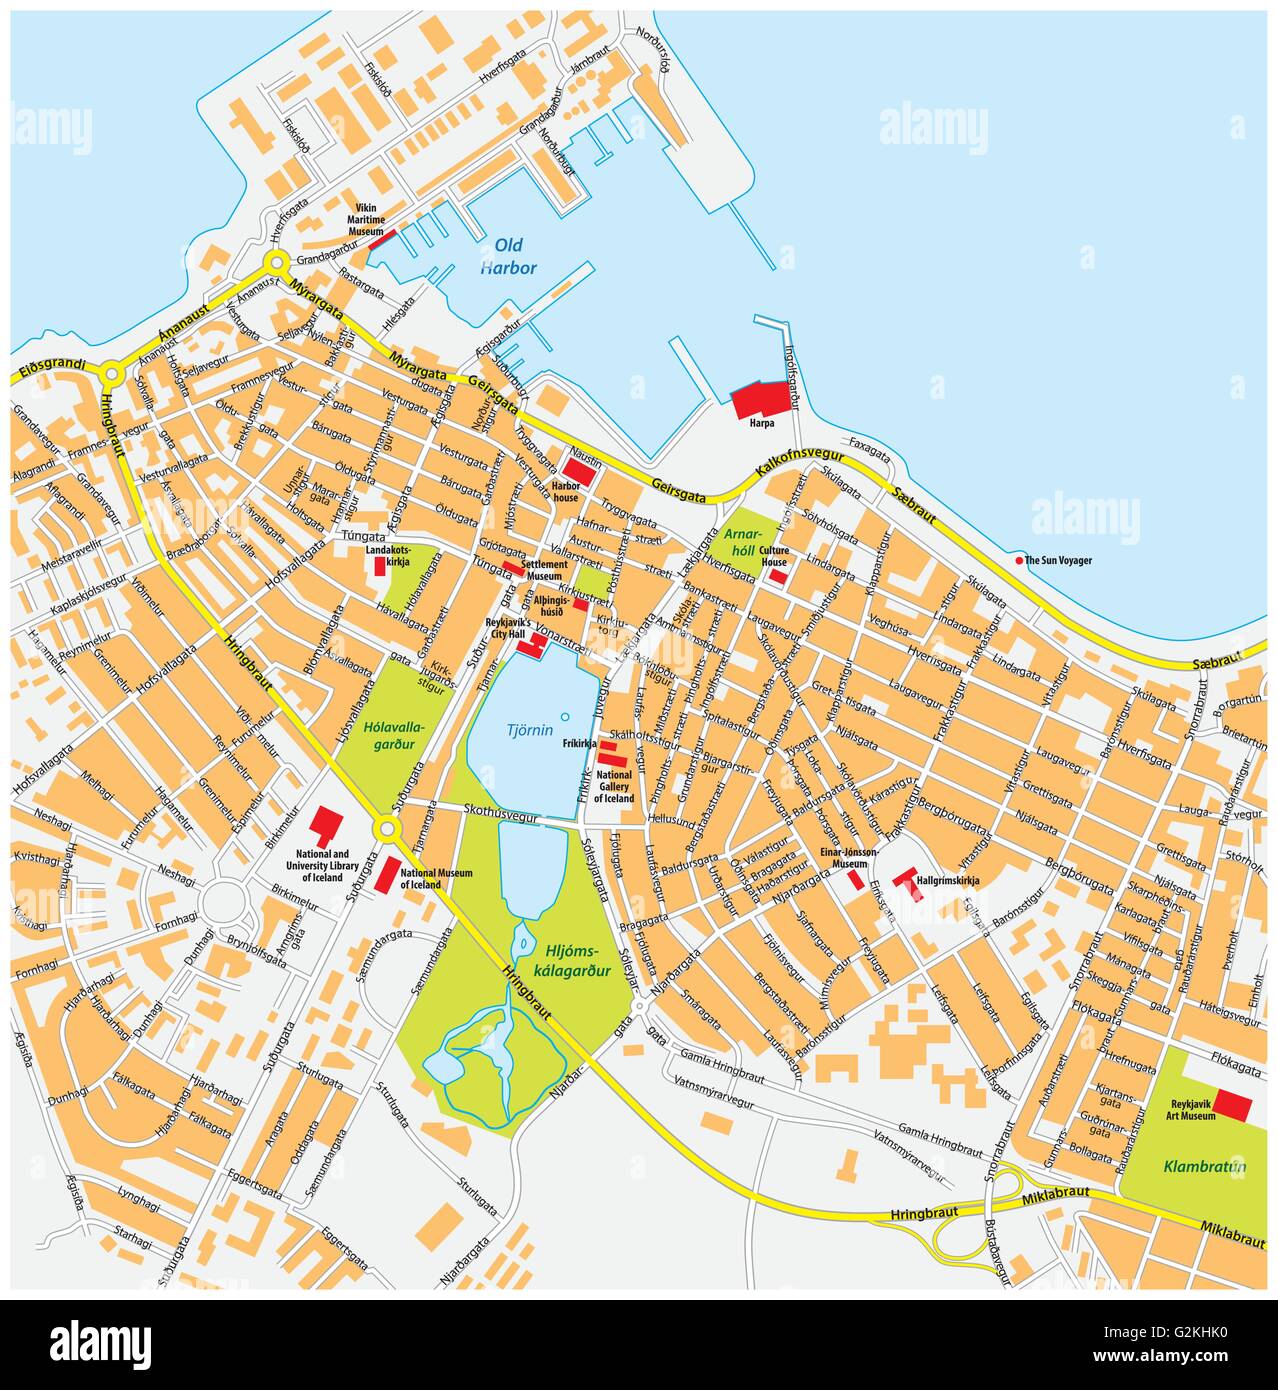 reykjavik city map with road names iceland Stock Vector